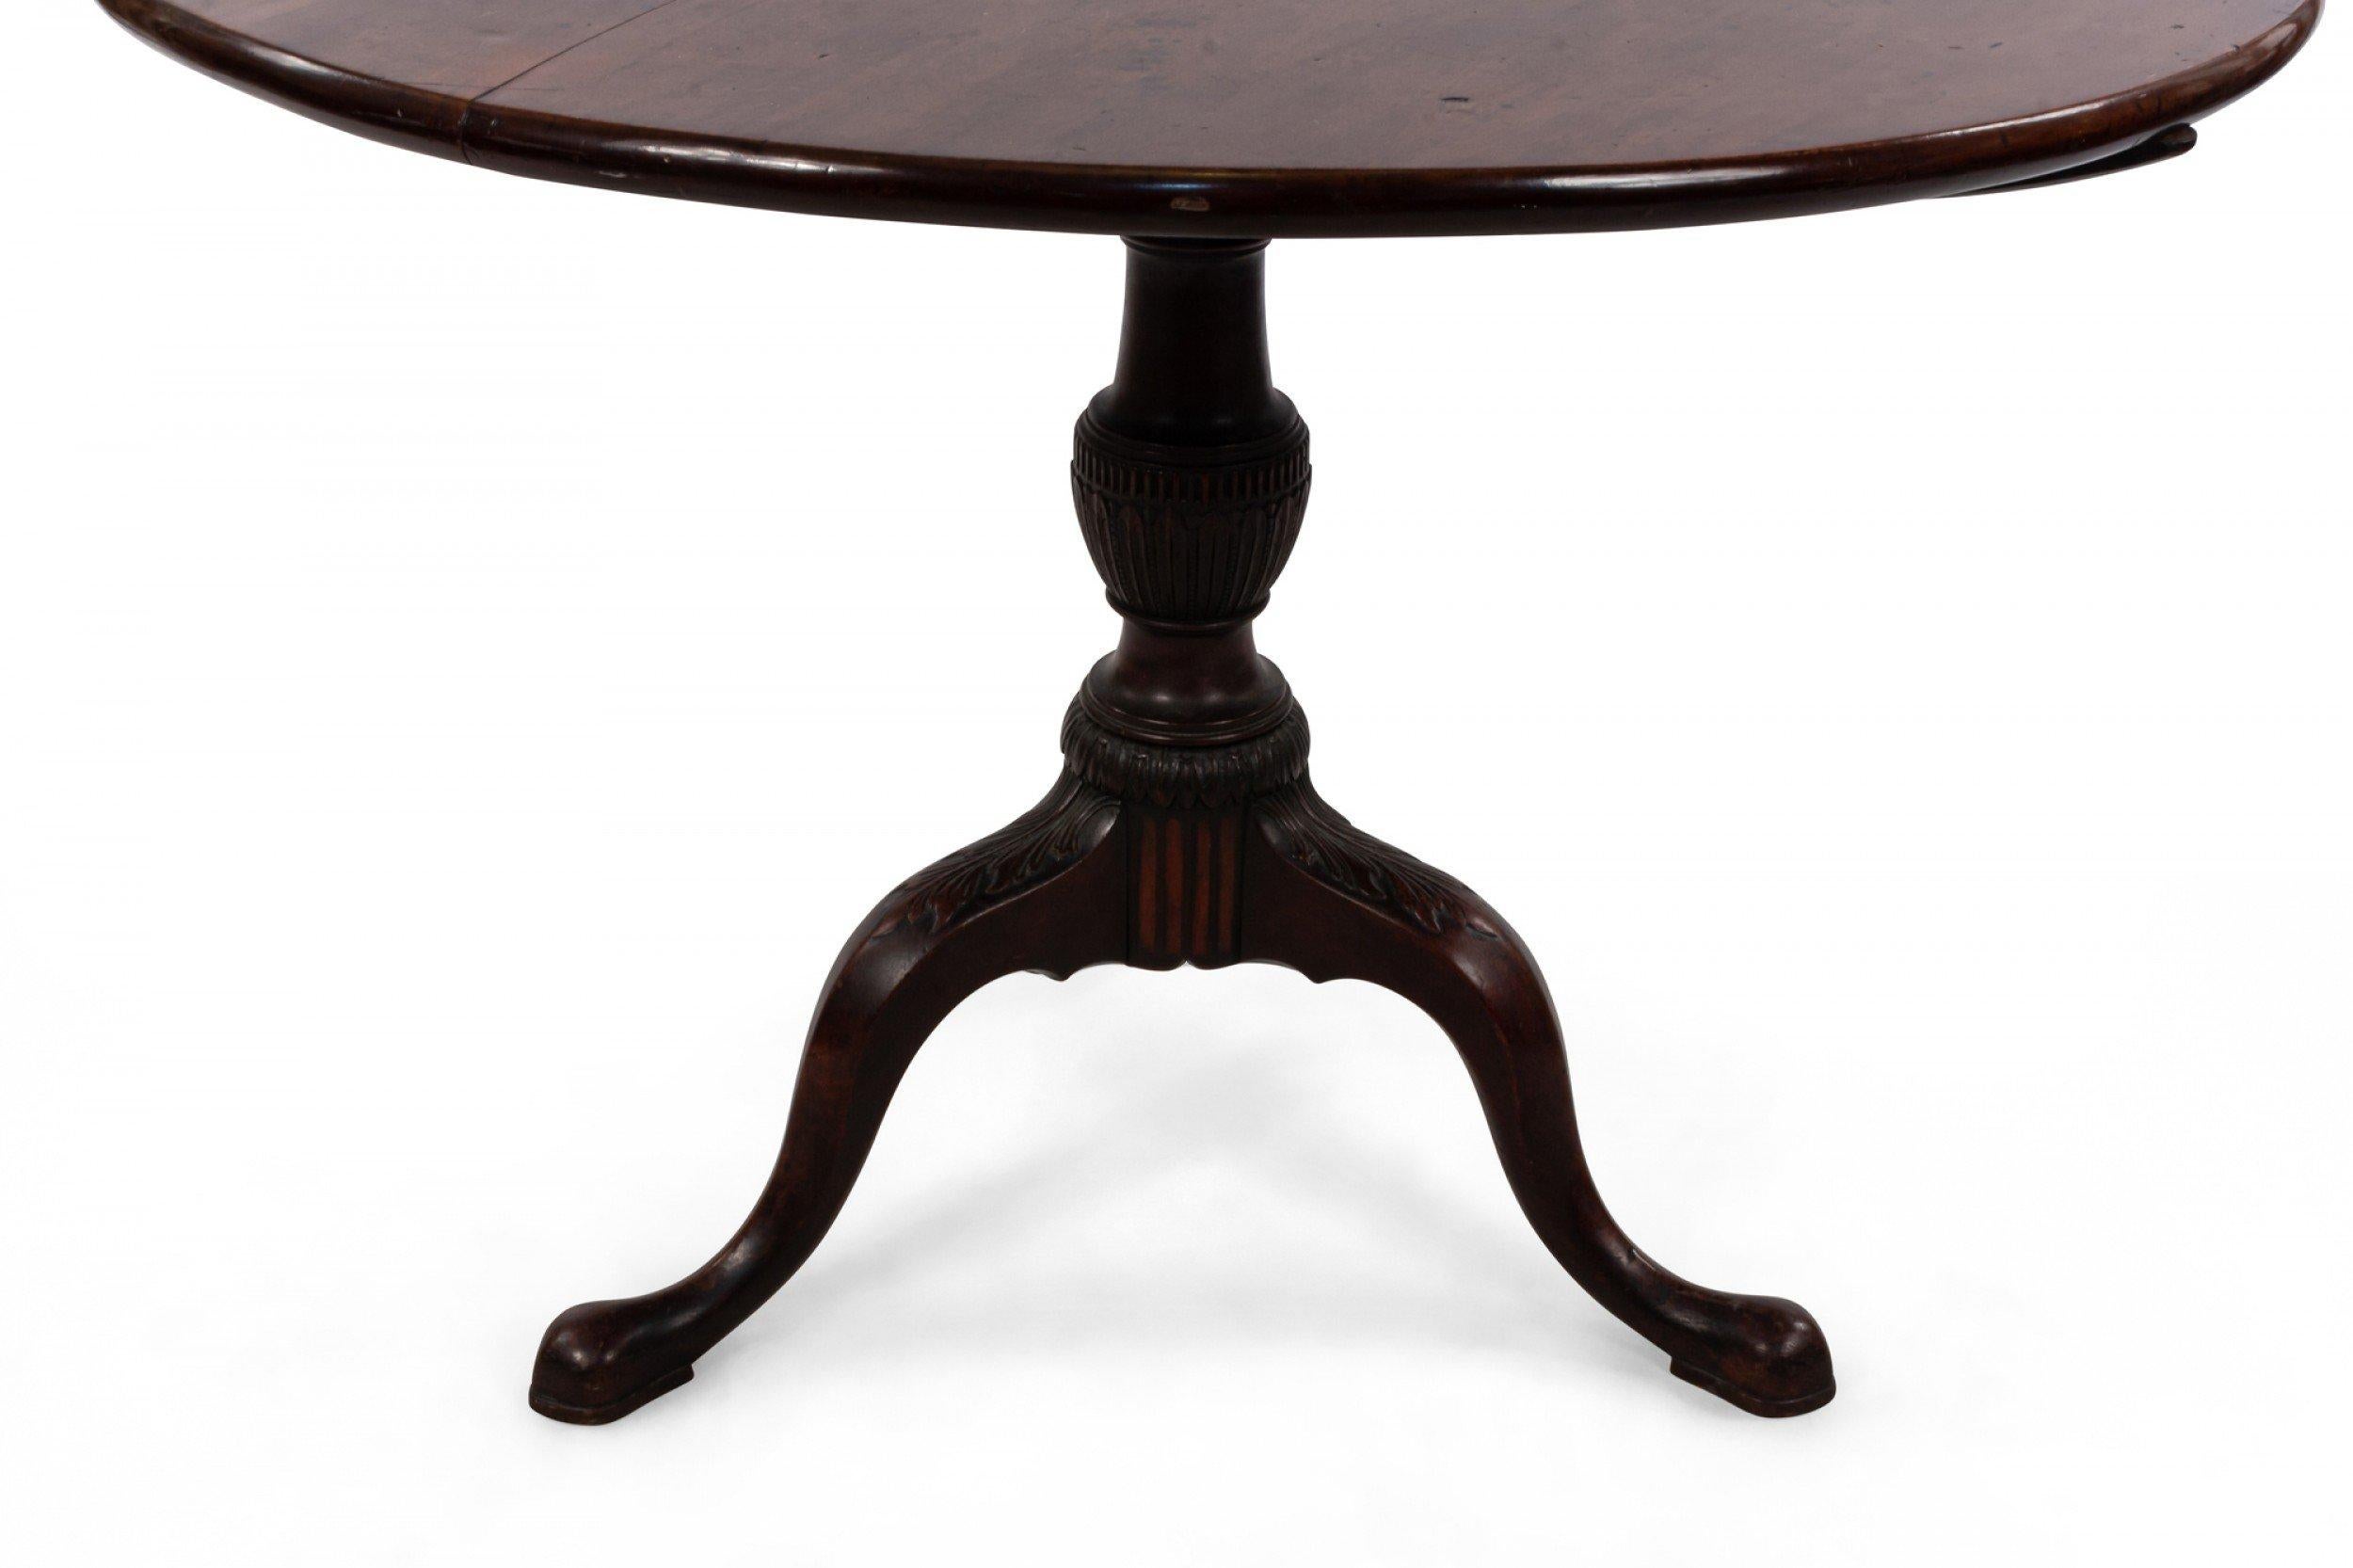 Queen Anne Cherry Wood Tilt Top Table with Cabriole Legs In Good Condition For Sale In New York, NY